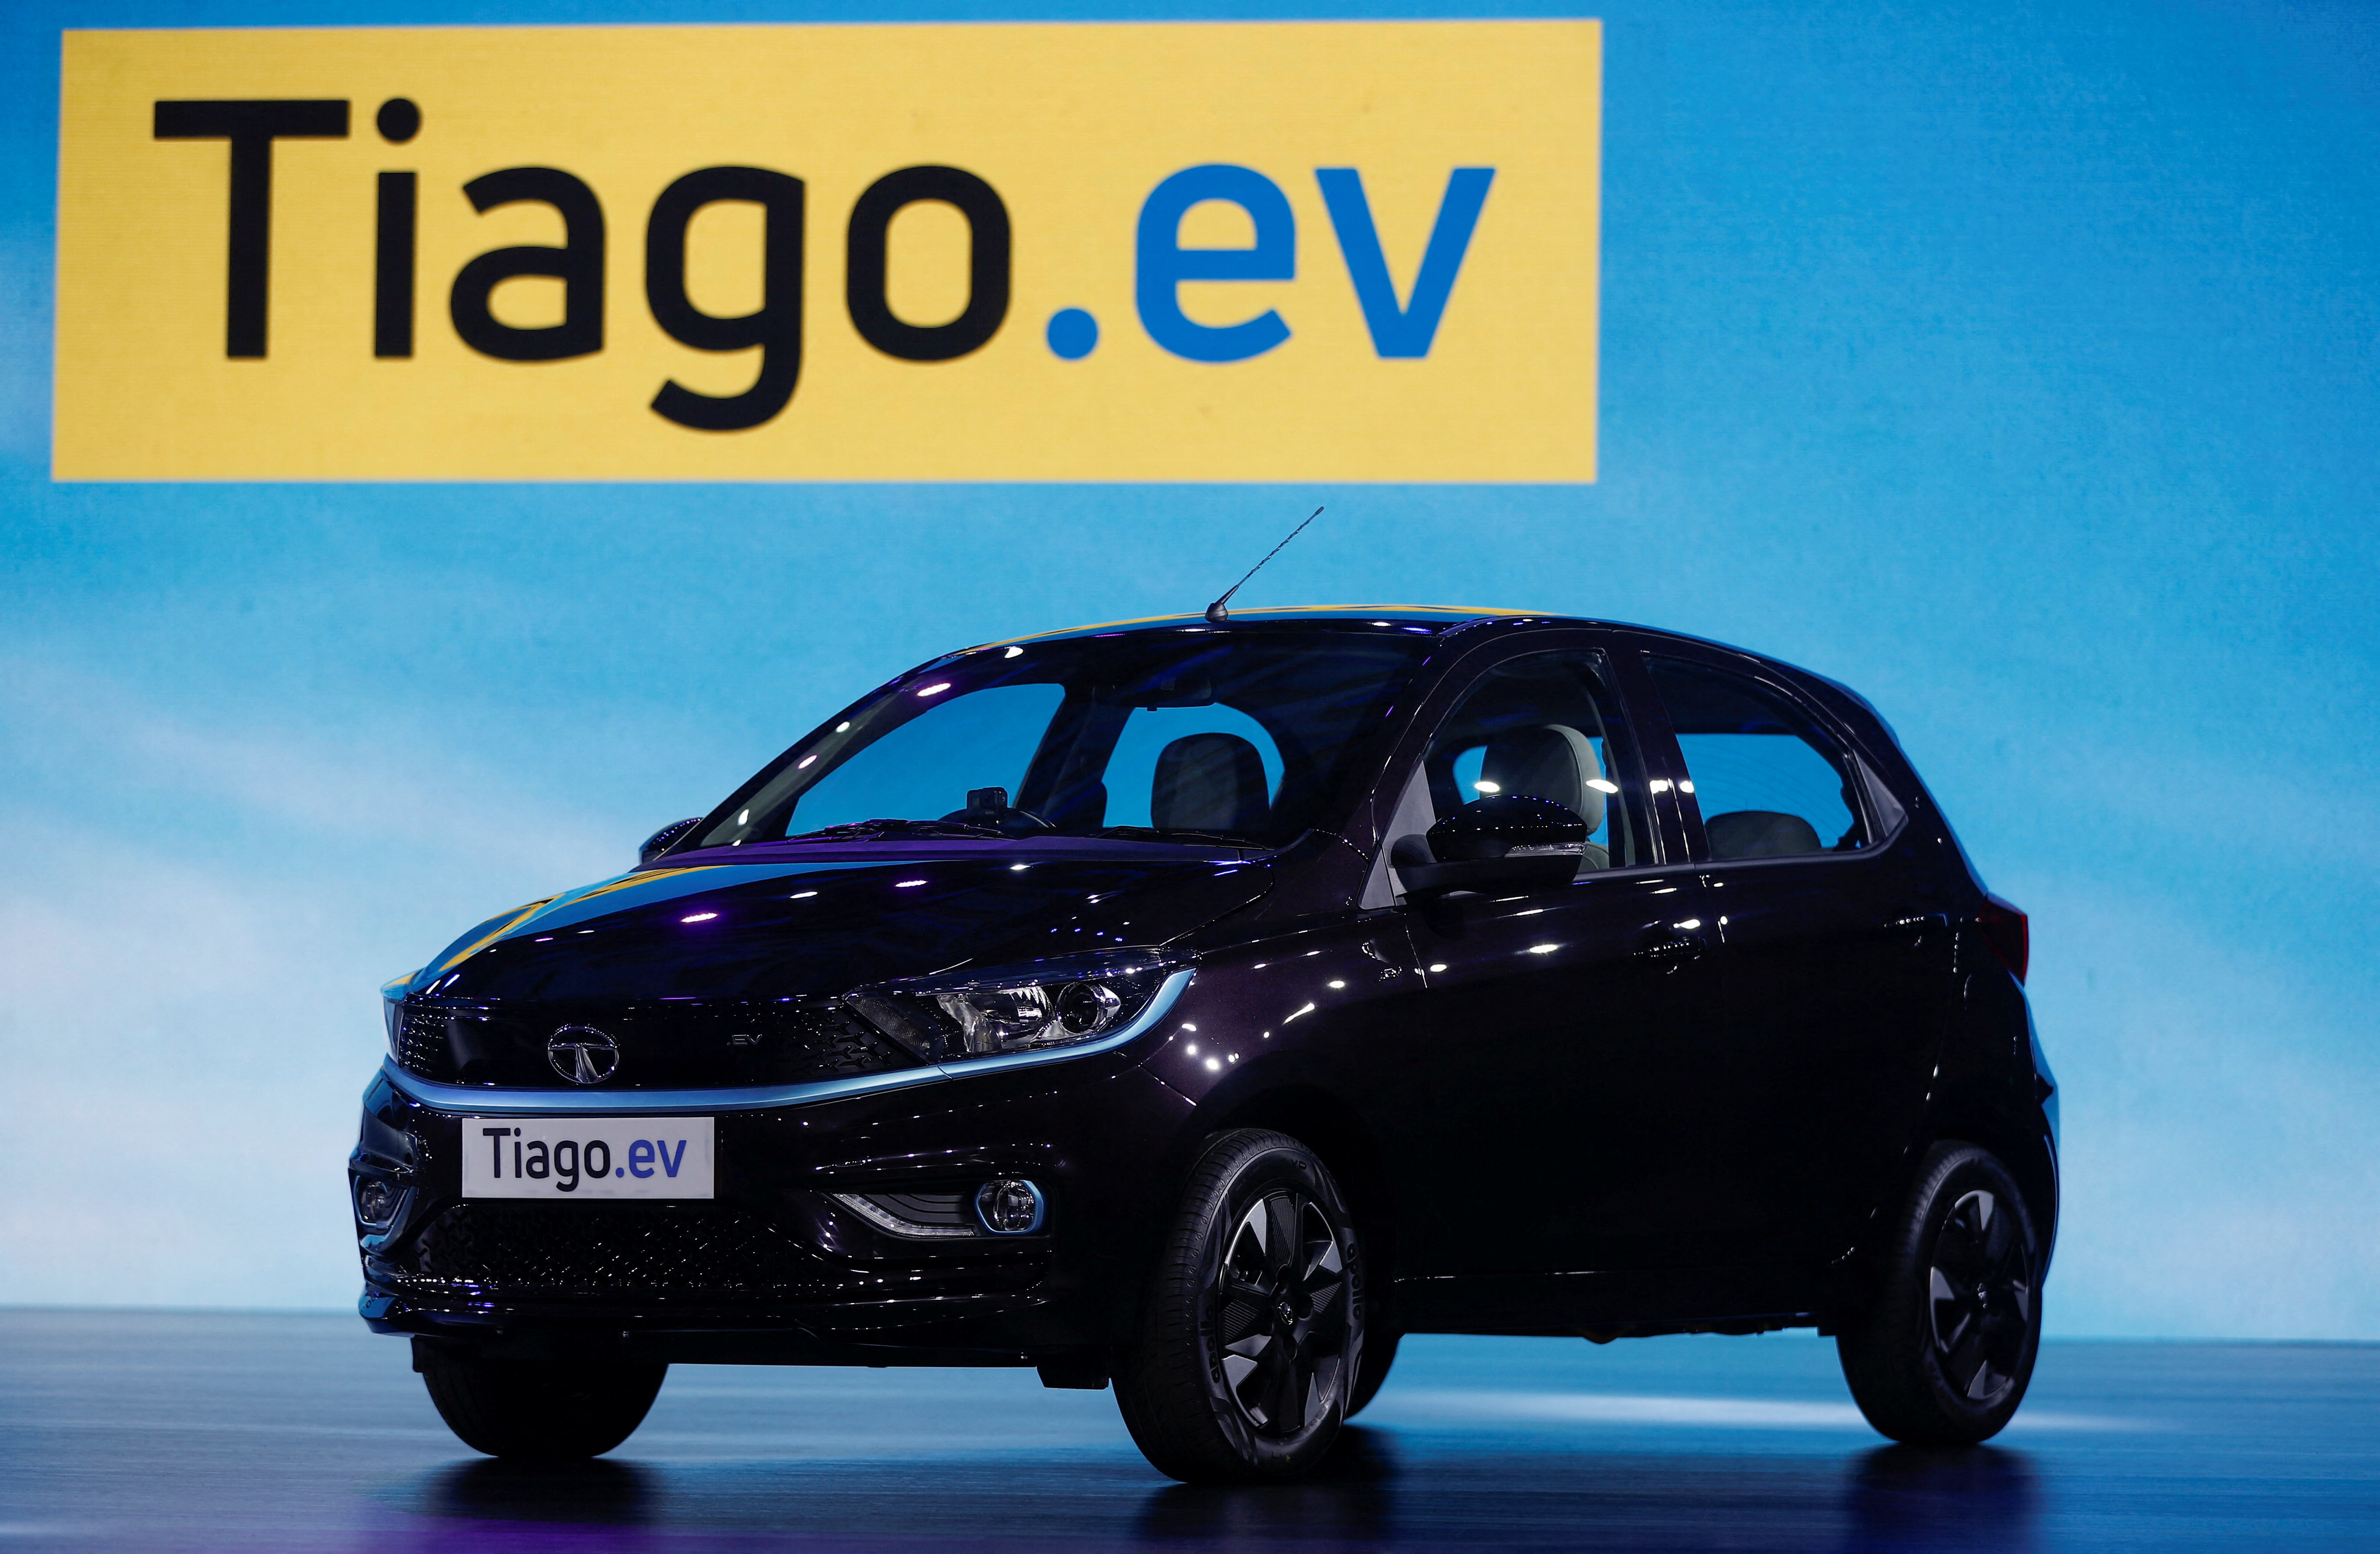 Tata Tiago EV electric hatchback unveiled during a global launch event in Mumbai